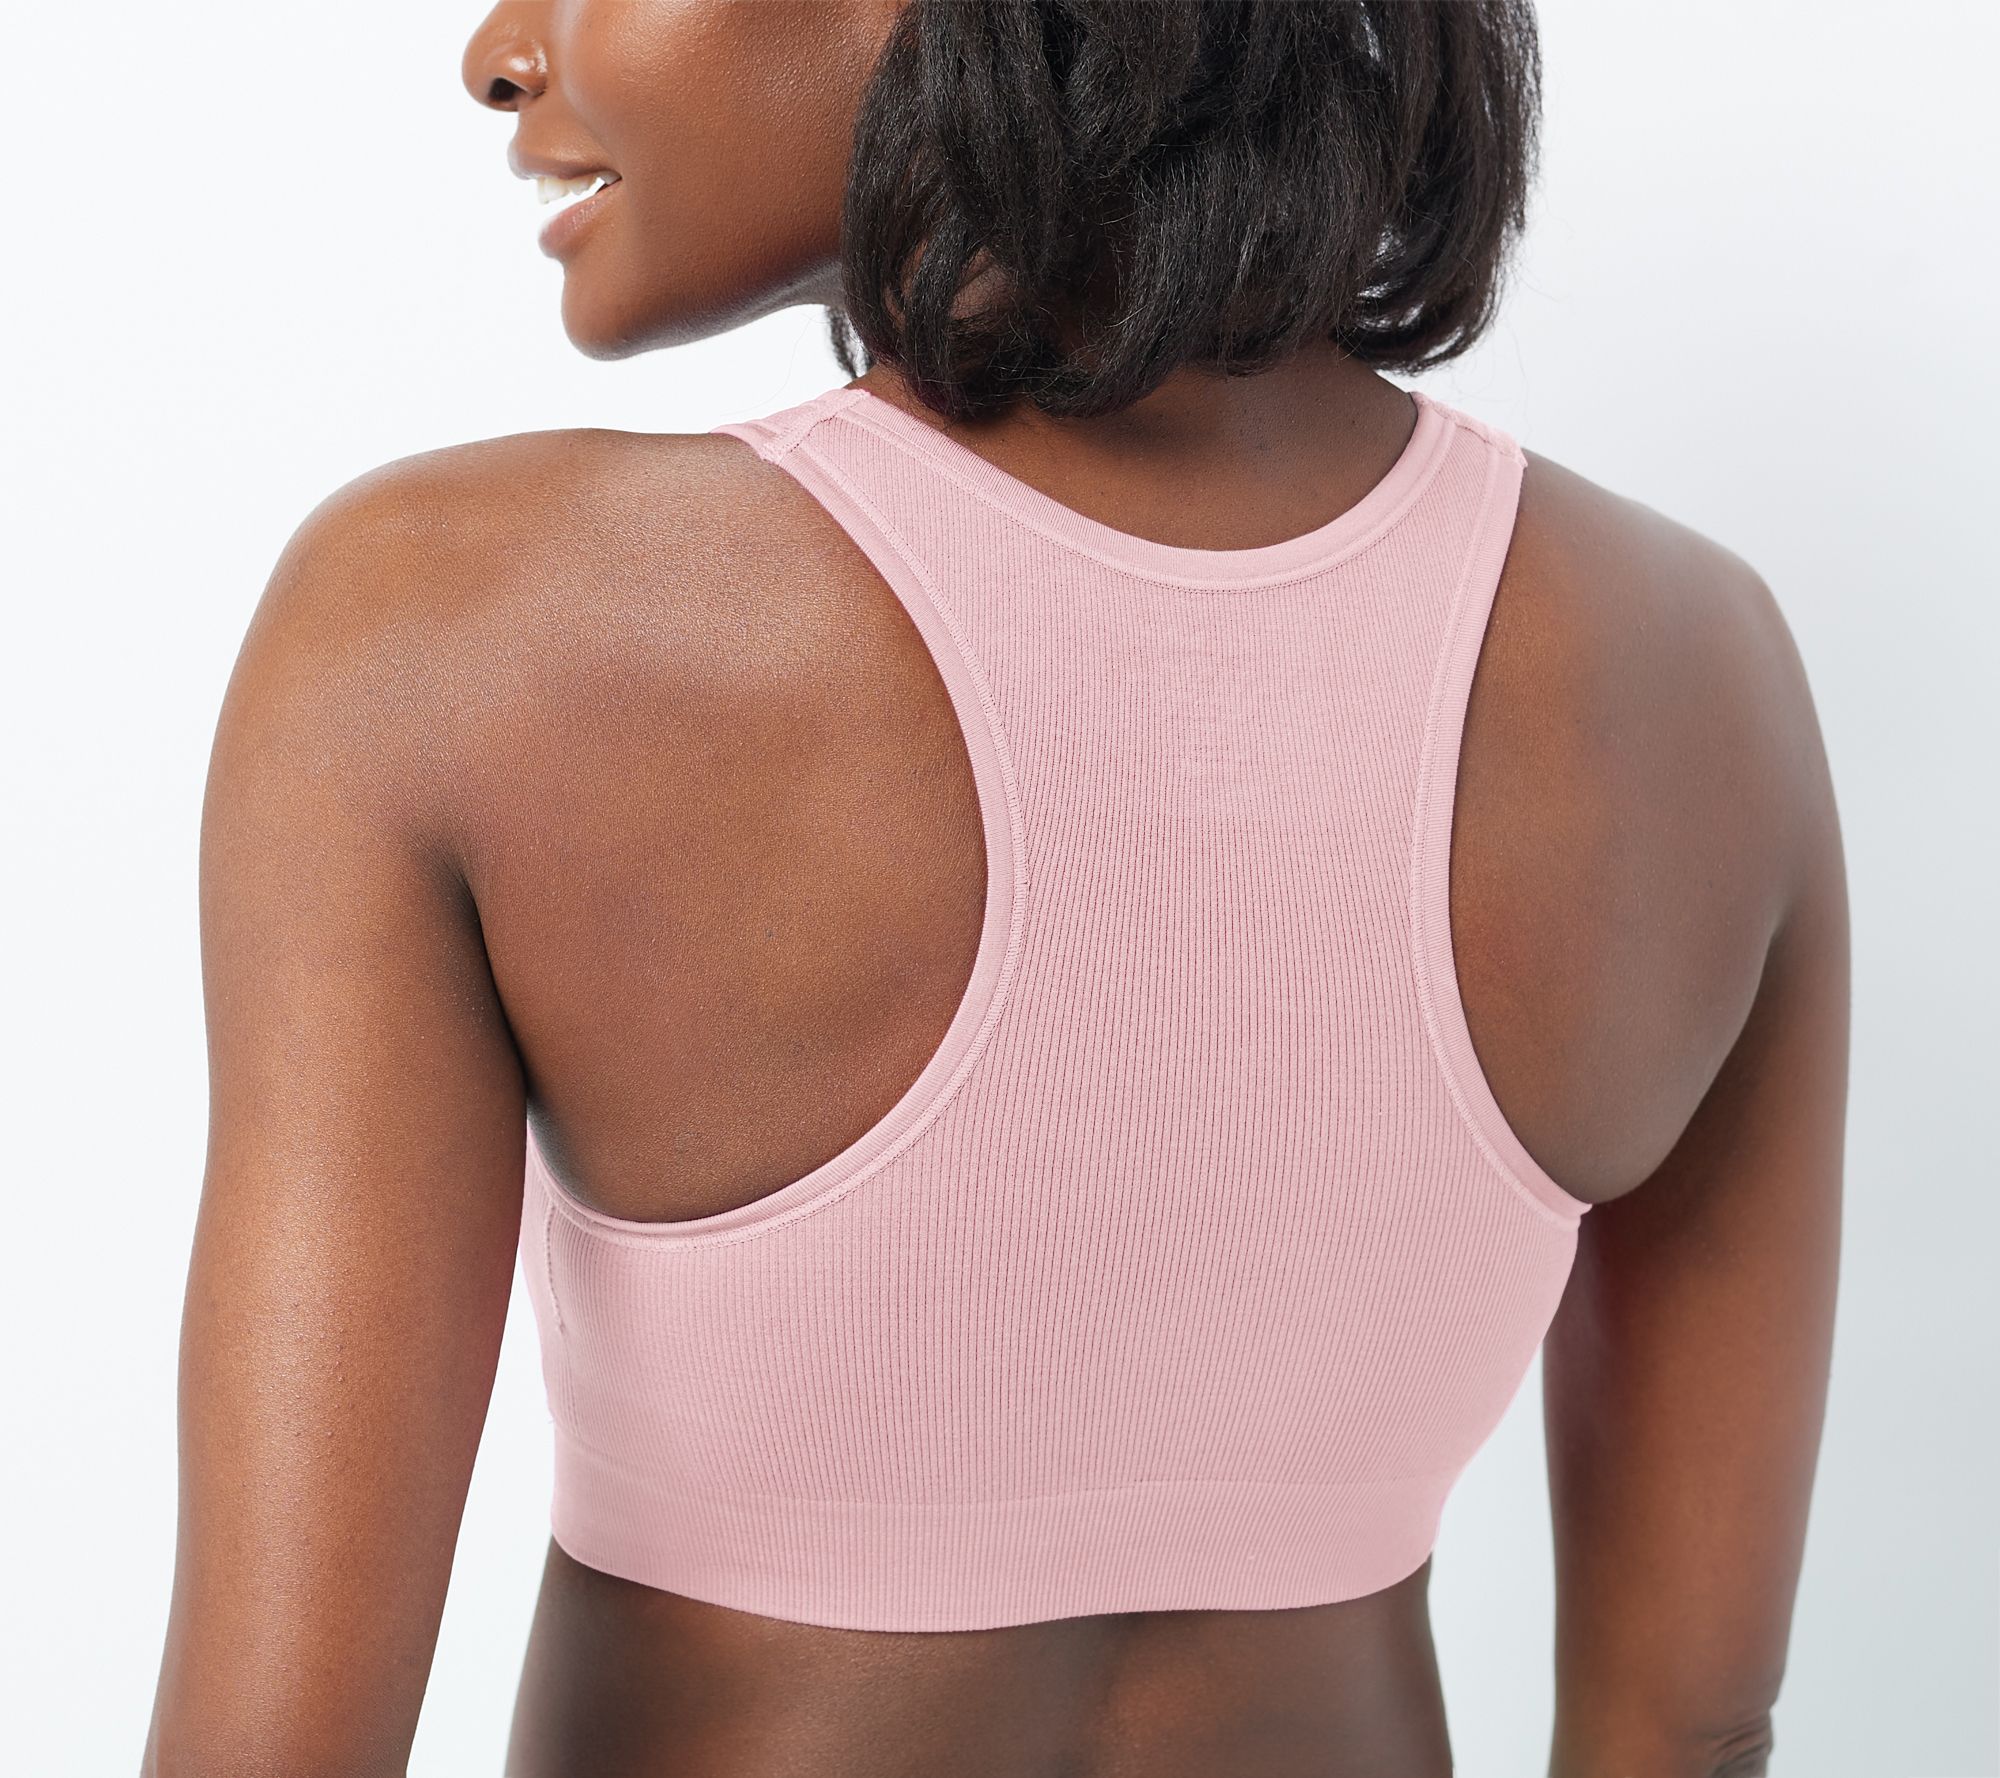  Women's Sports Bras - DDD / 38 / Women's Sports Bras / Women's  Bras: Clothing, Shoes & Jewelry